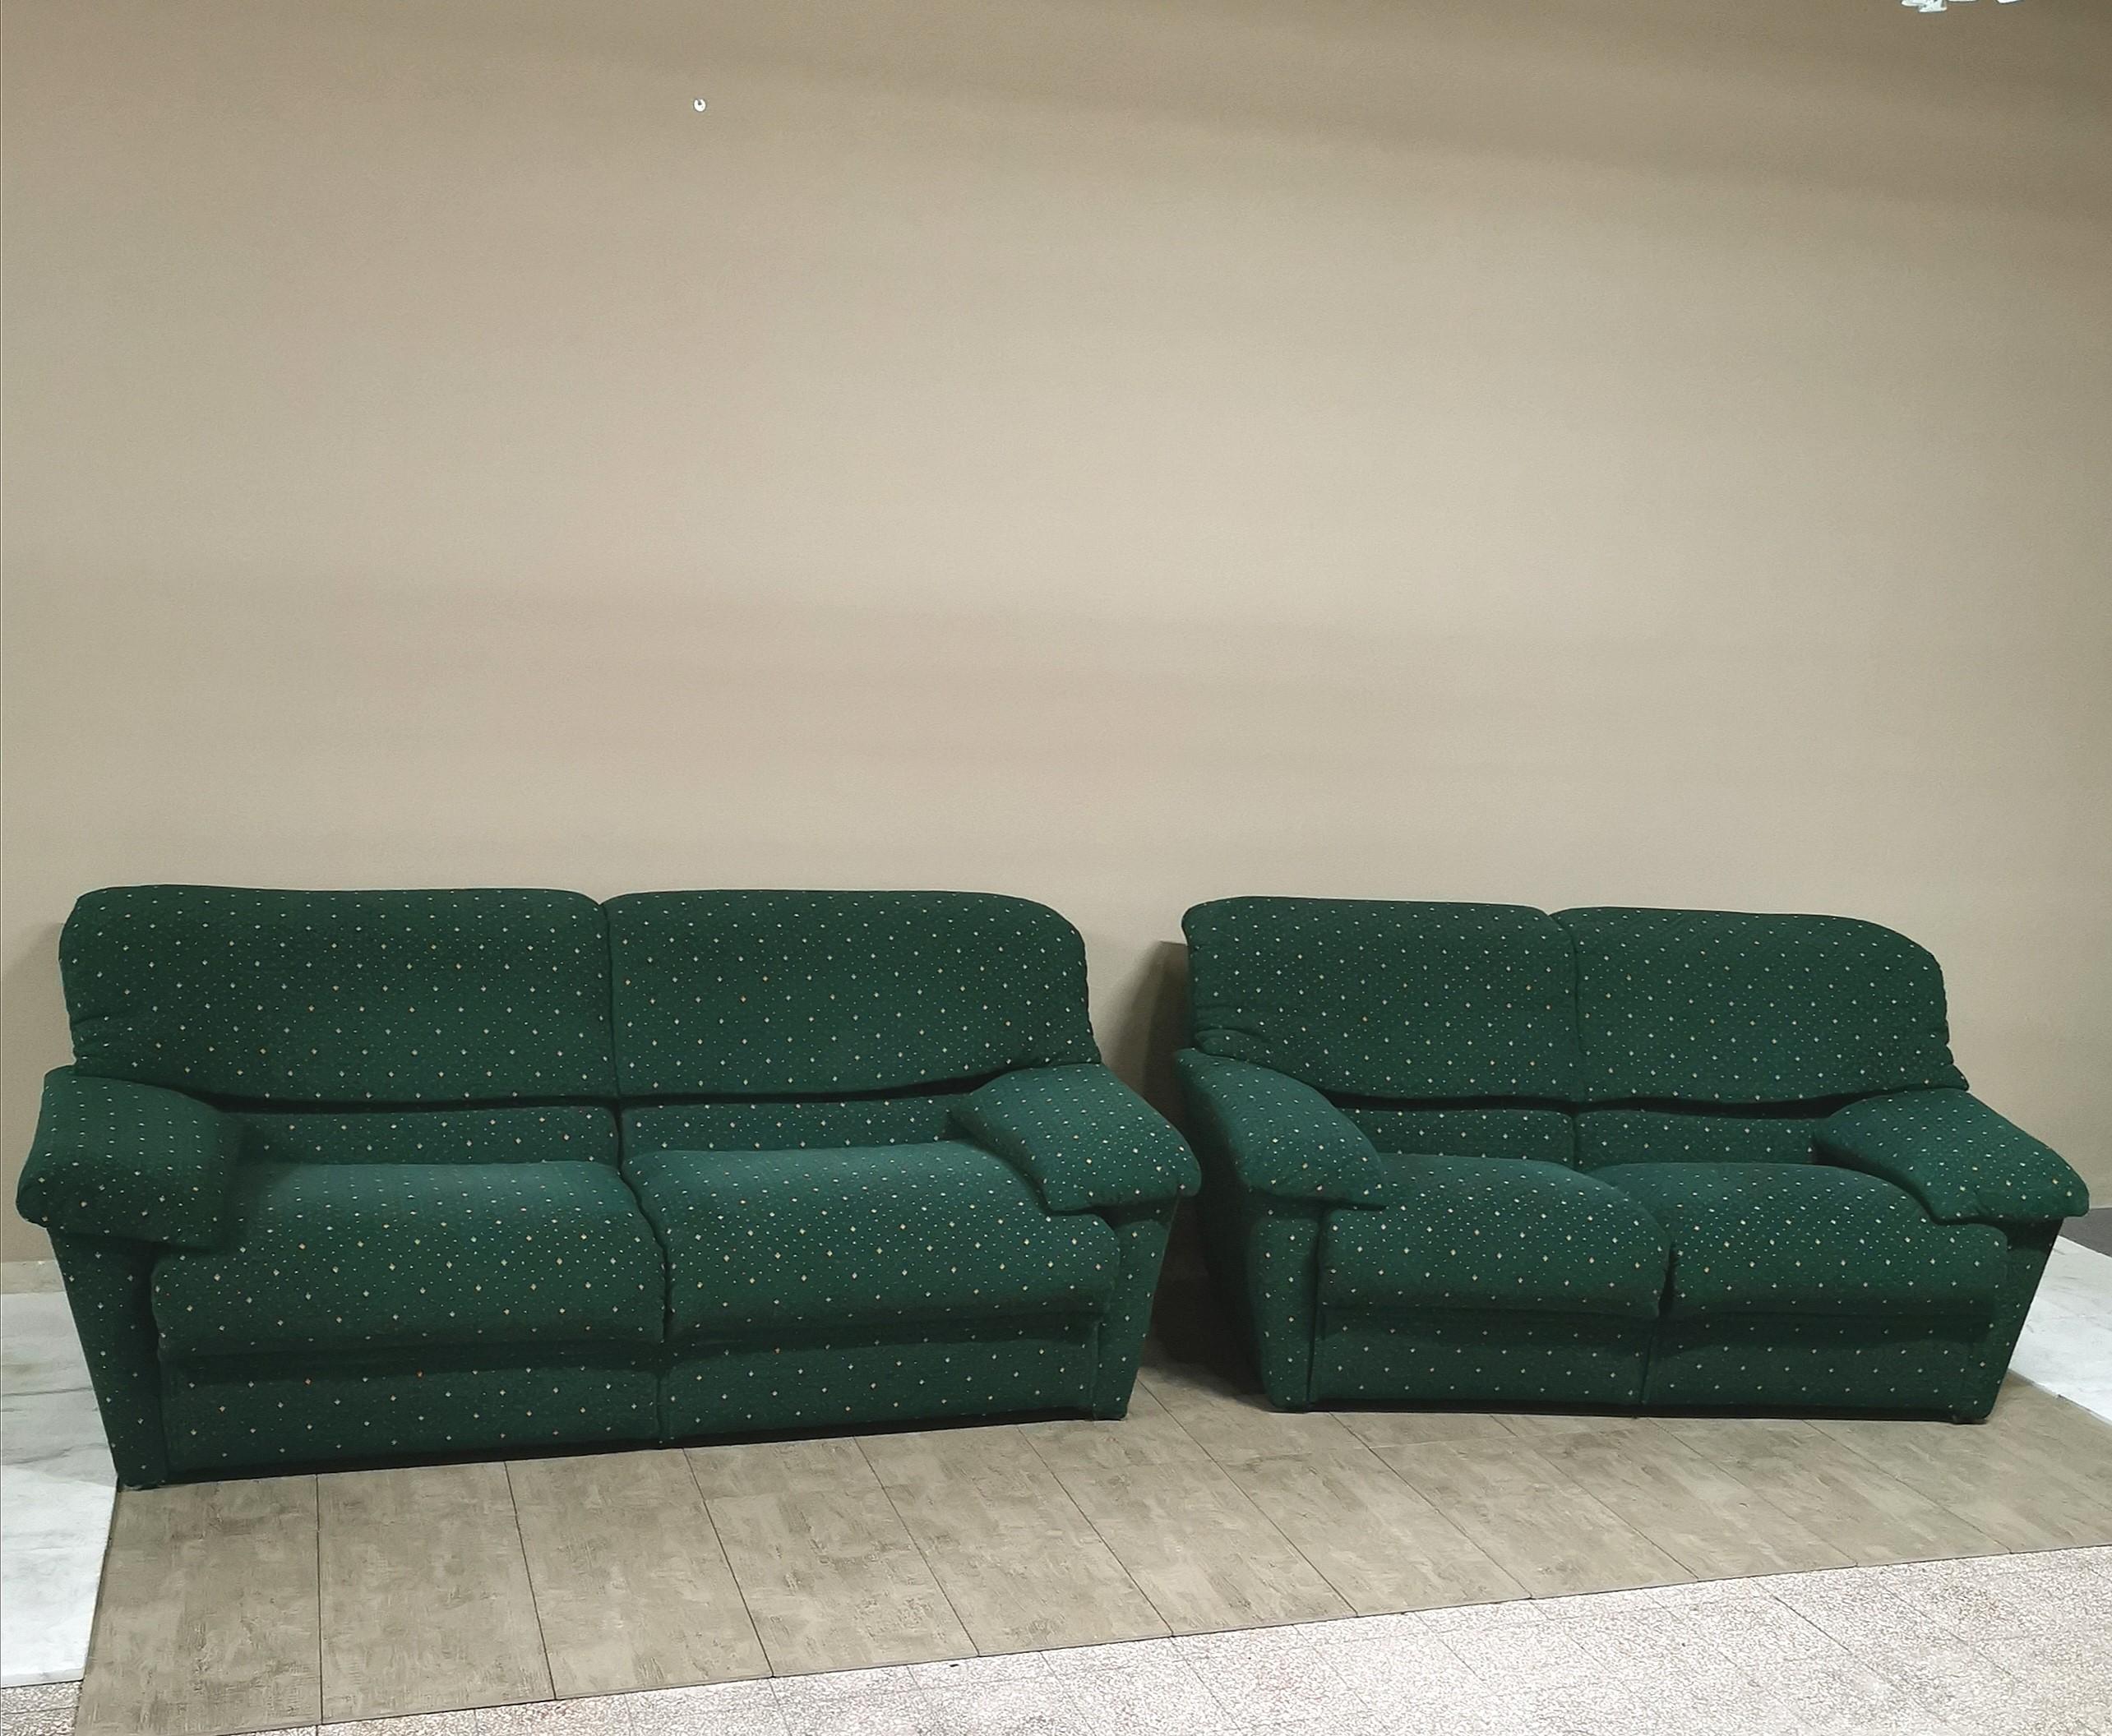 Set of 2 sofas produced by the postmodern Italian company Pol74. One sofa is 3-seat, the other 2-seat with relaxation mechanism, all in forest green striped velvet depicting small rhombus designs in relief with reclining headrests and removable and